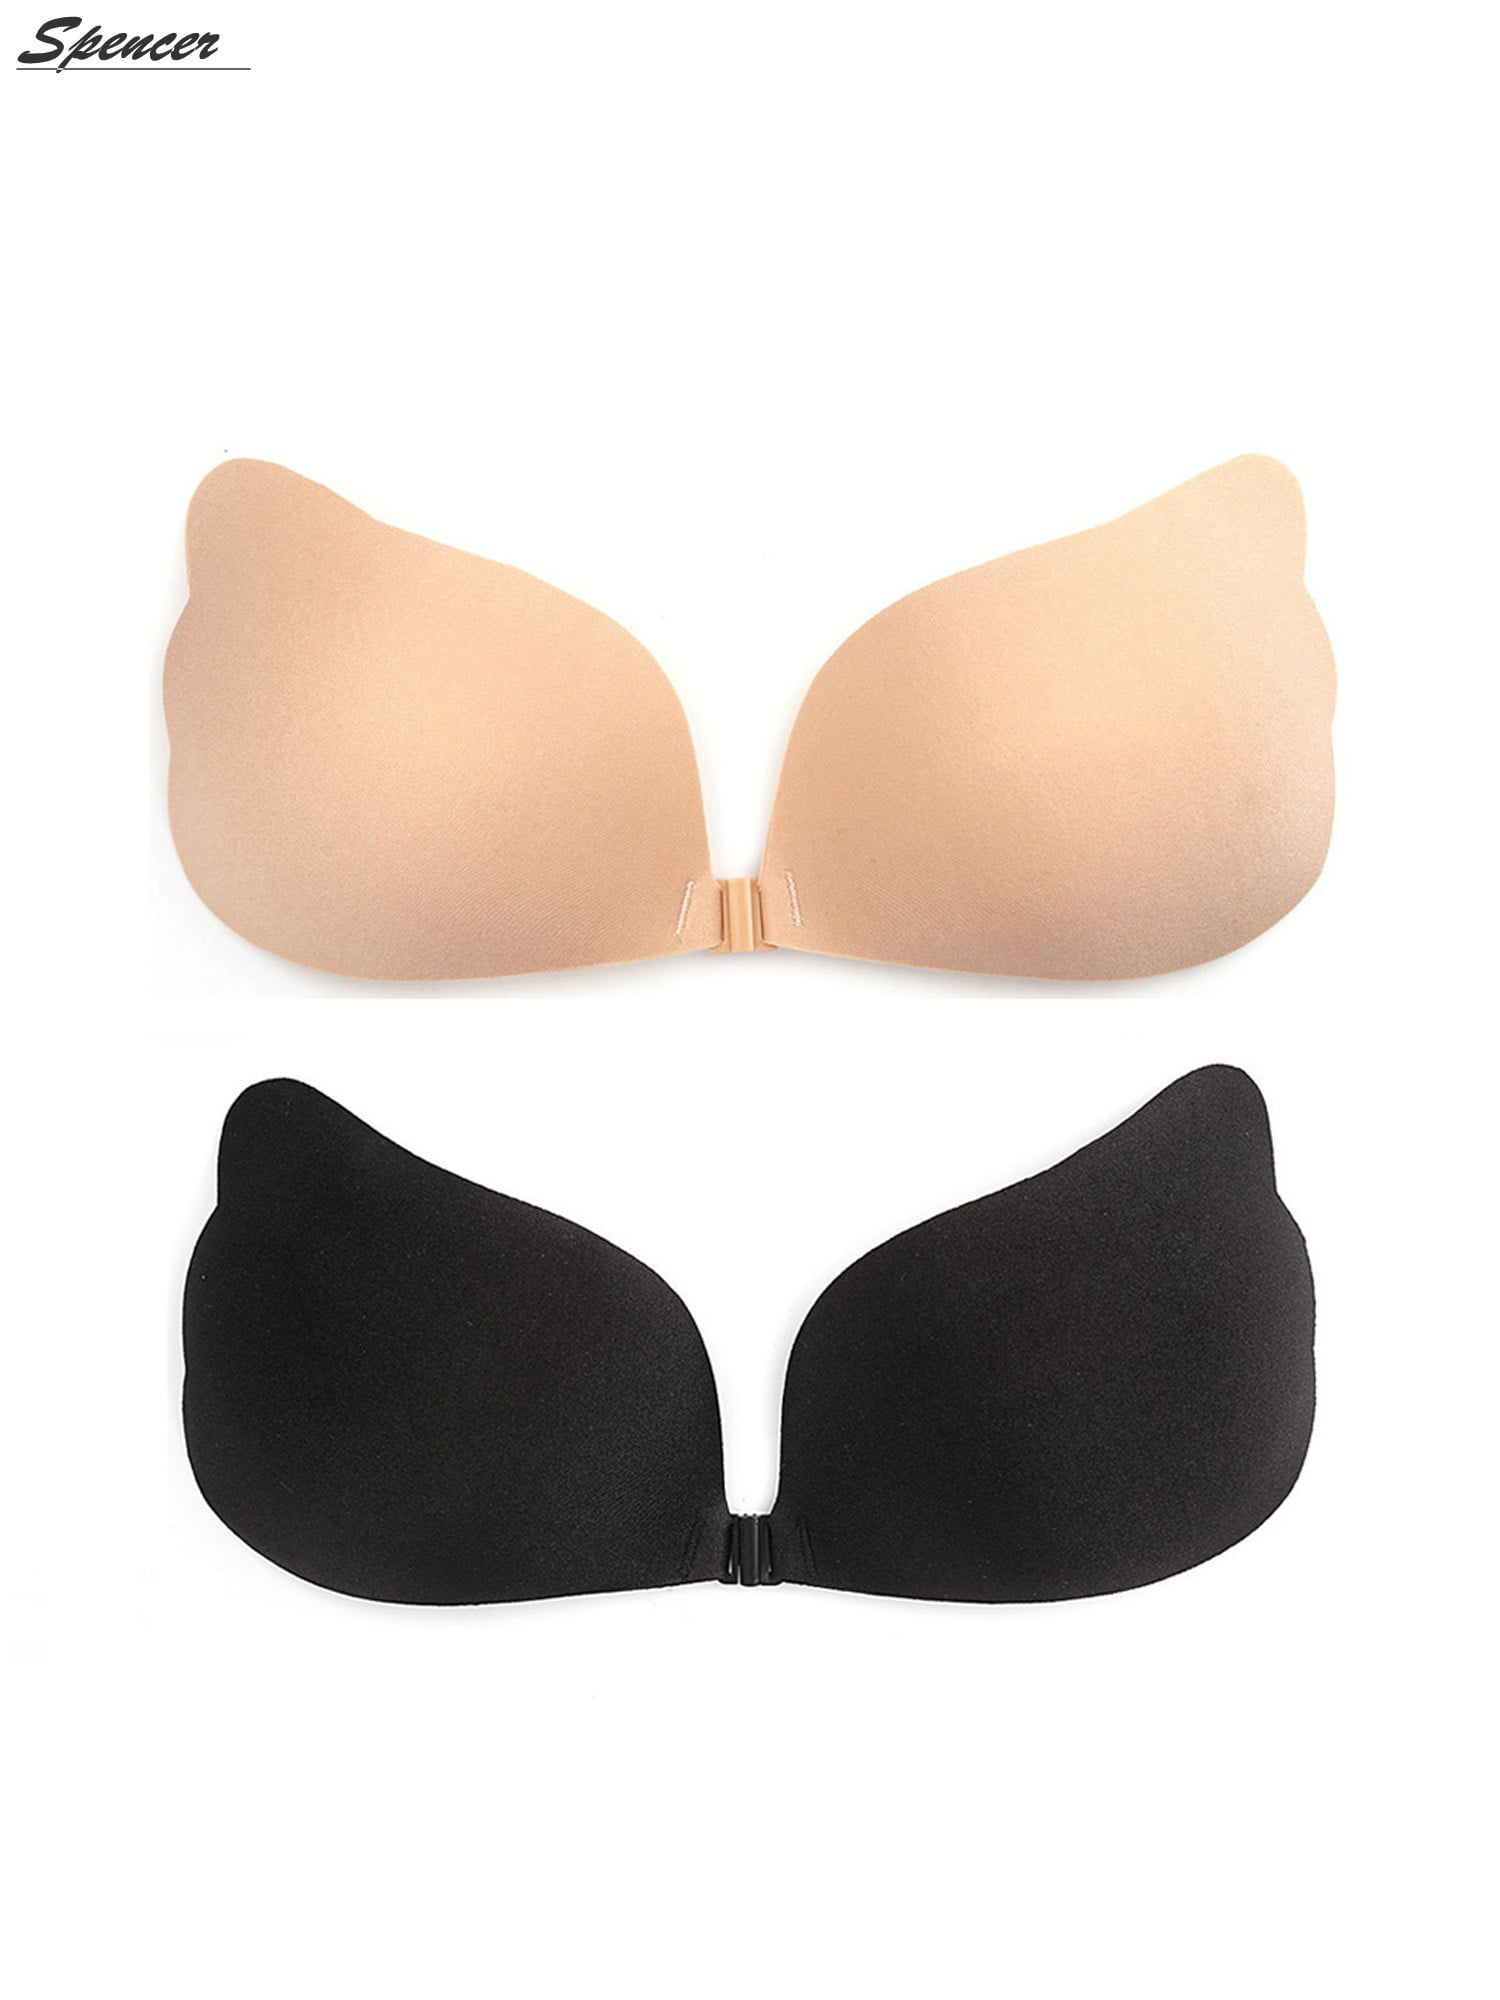 Silicone rt Bra M&S Bras Backless Push Up Bra for Saggy Breast Bra